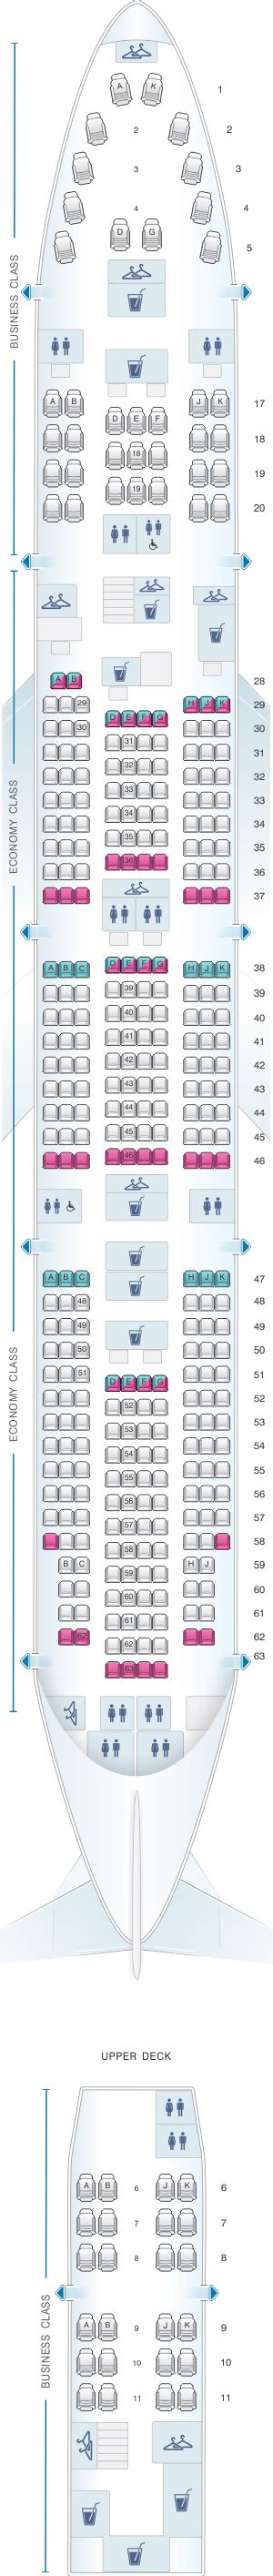 Boeing 747 400 Seating Chart China Airlines